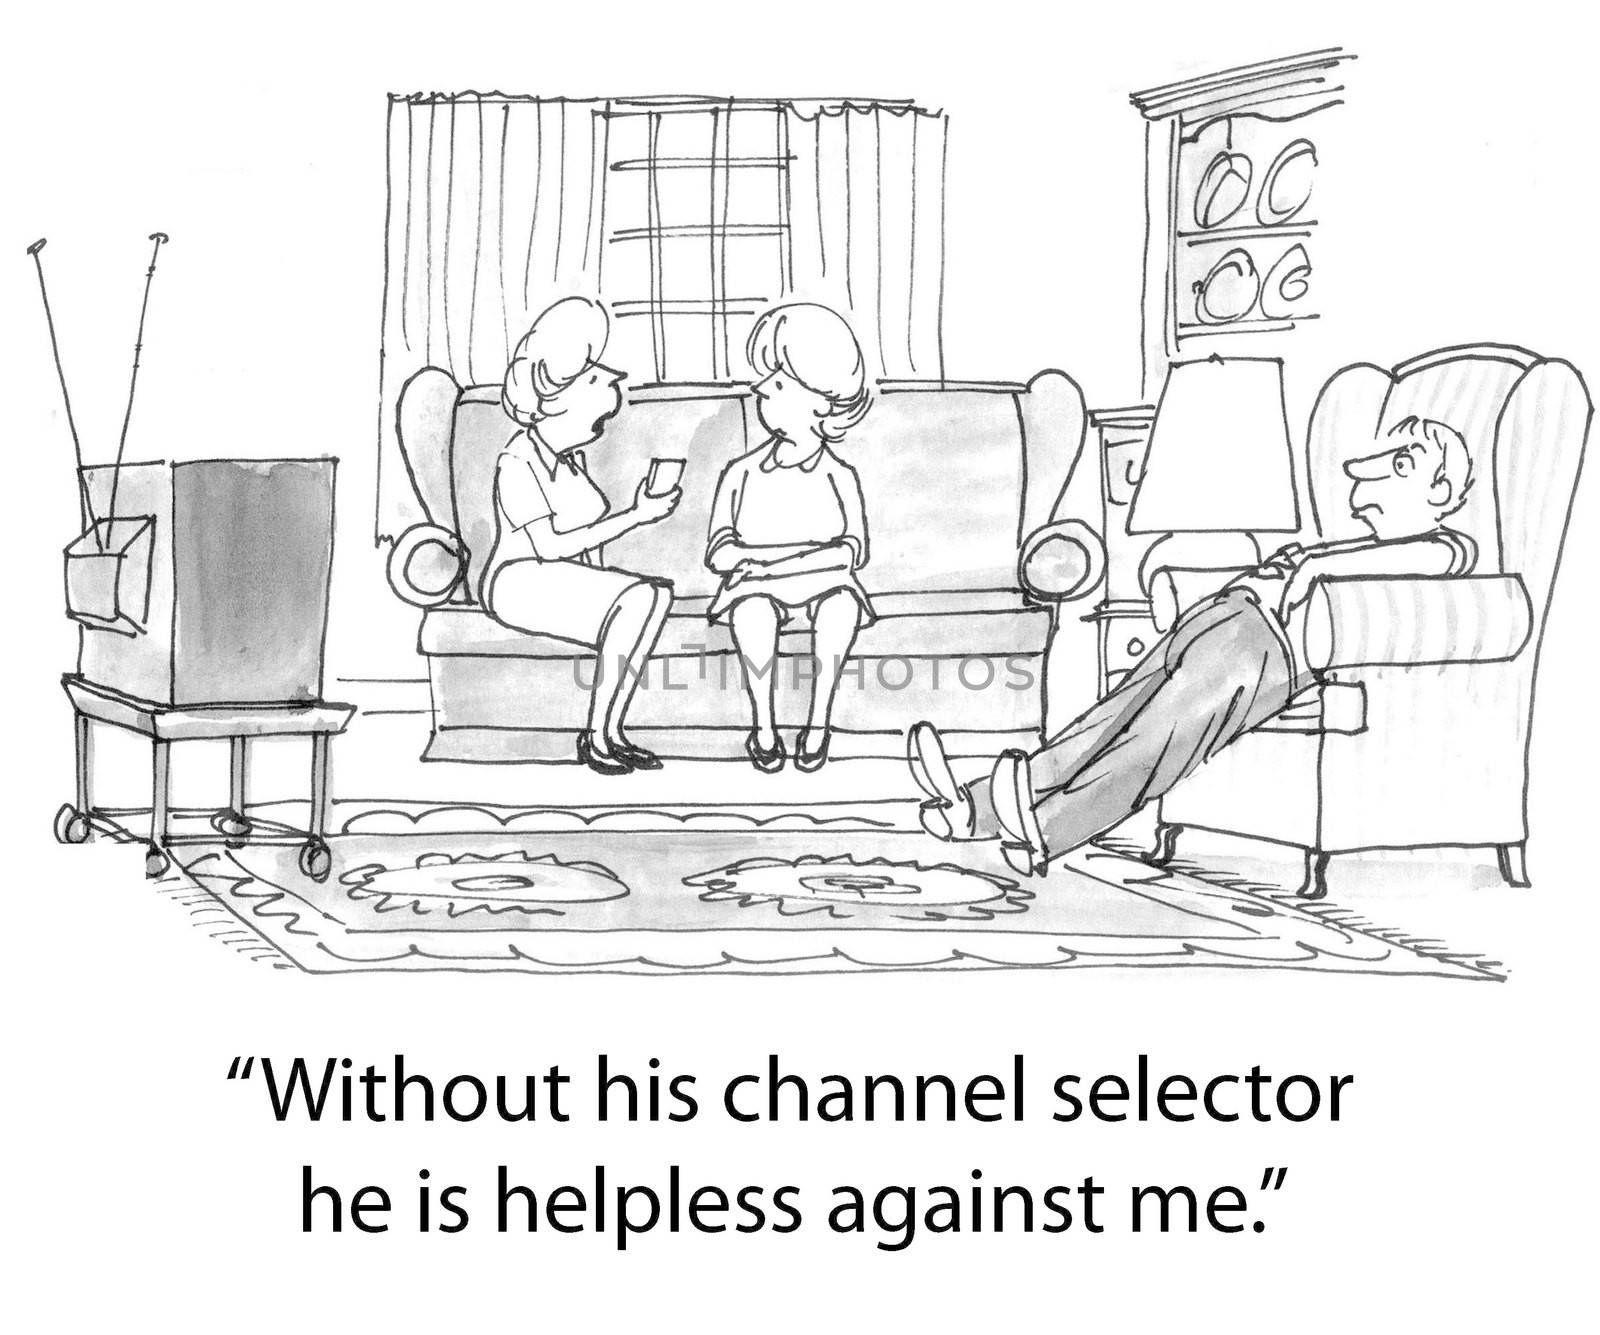 "Without his channel selector he is helpless against me."